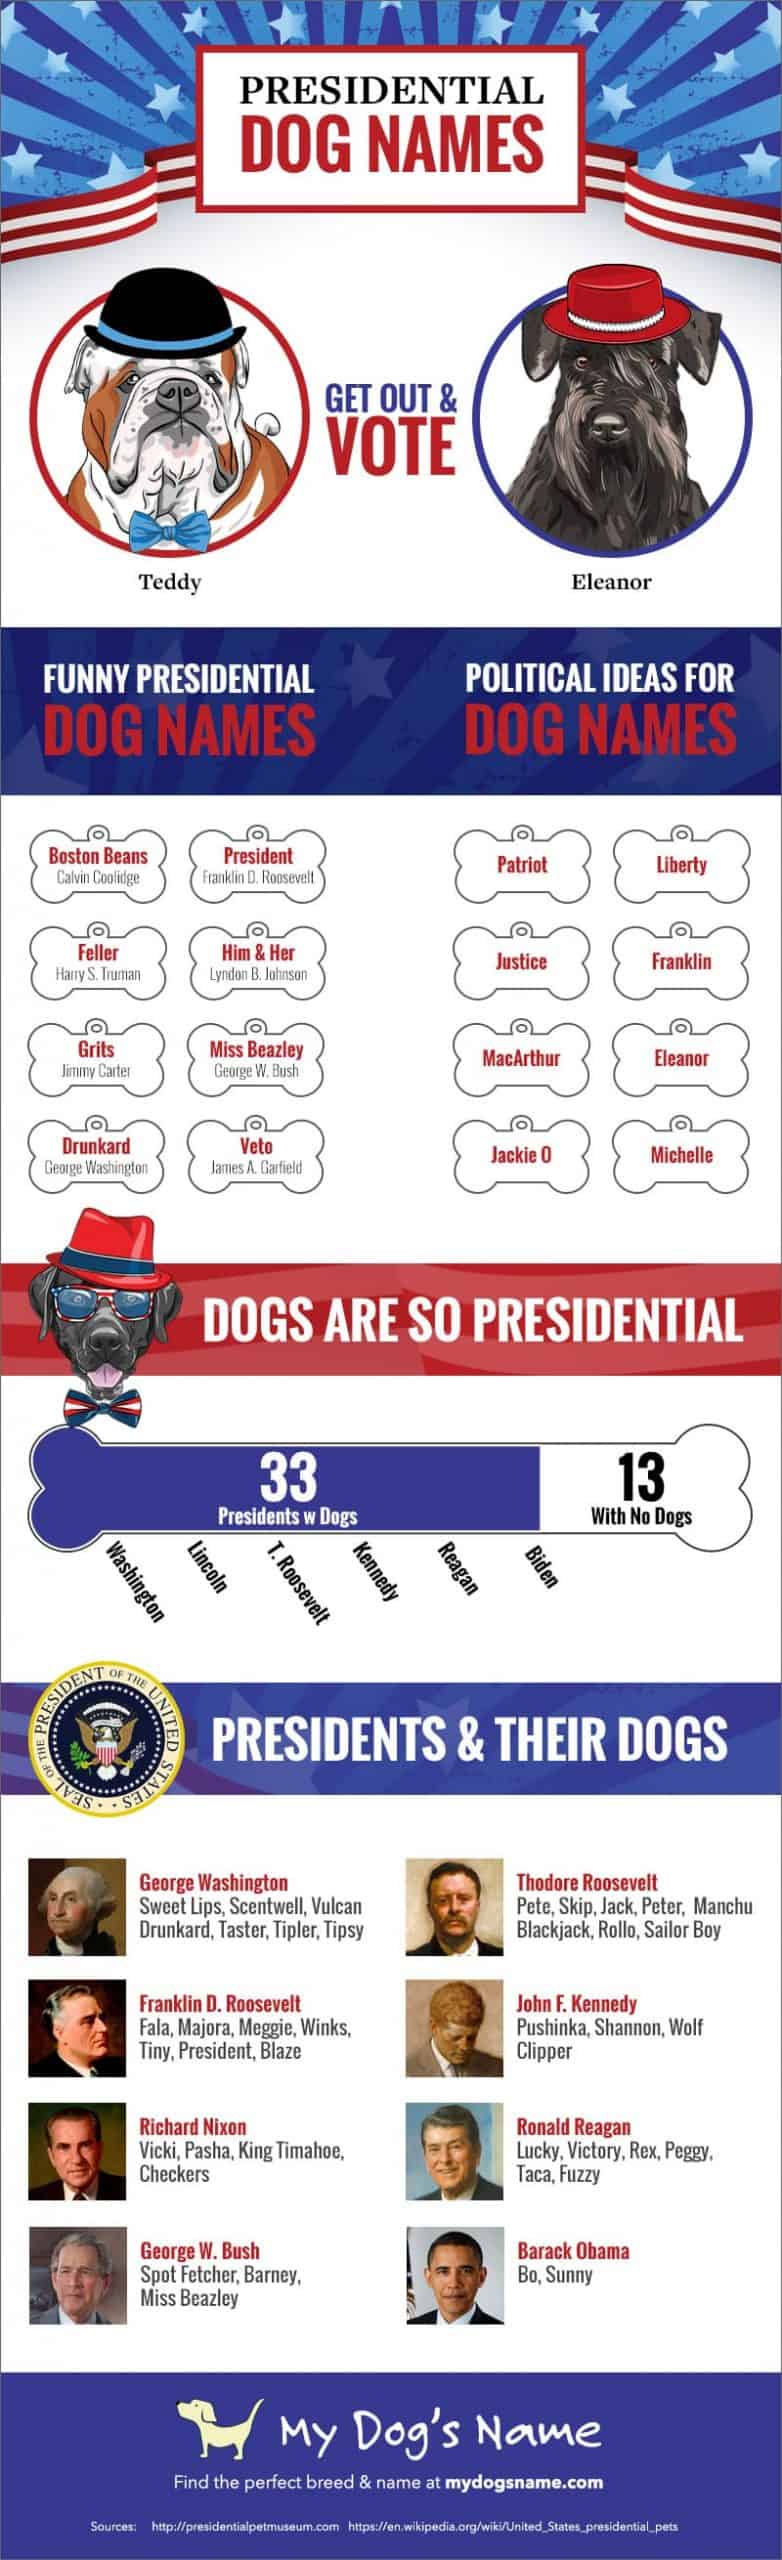 Presidential Dog Names [Infographic]